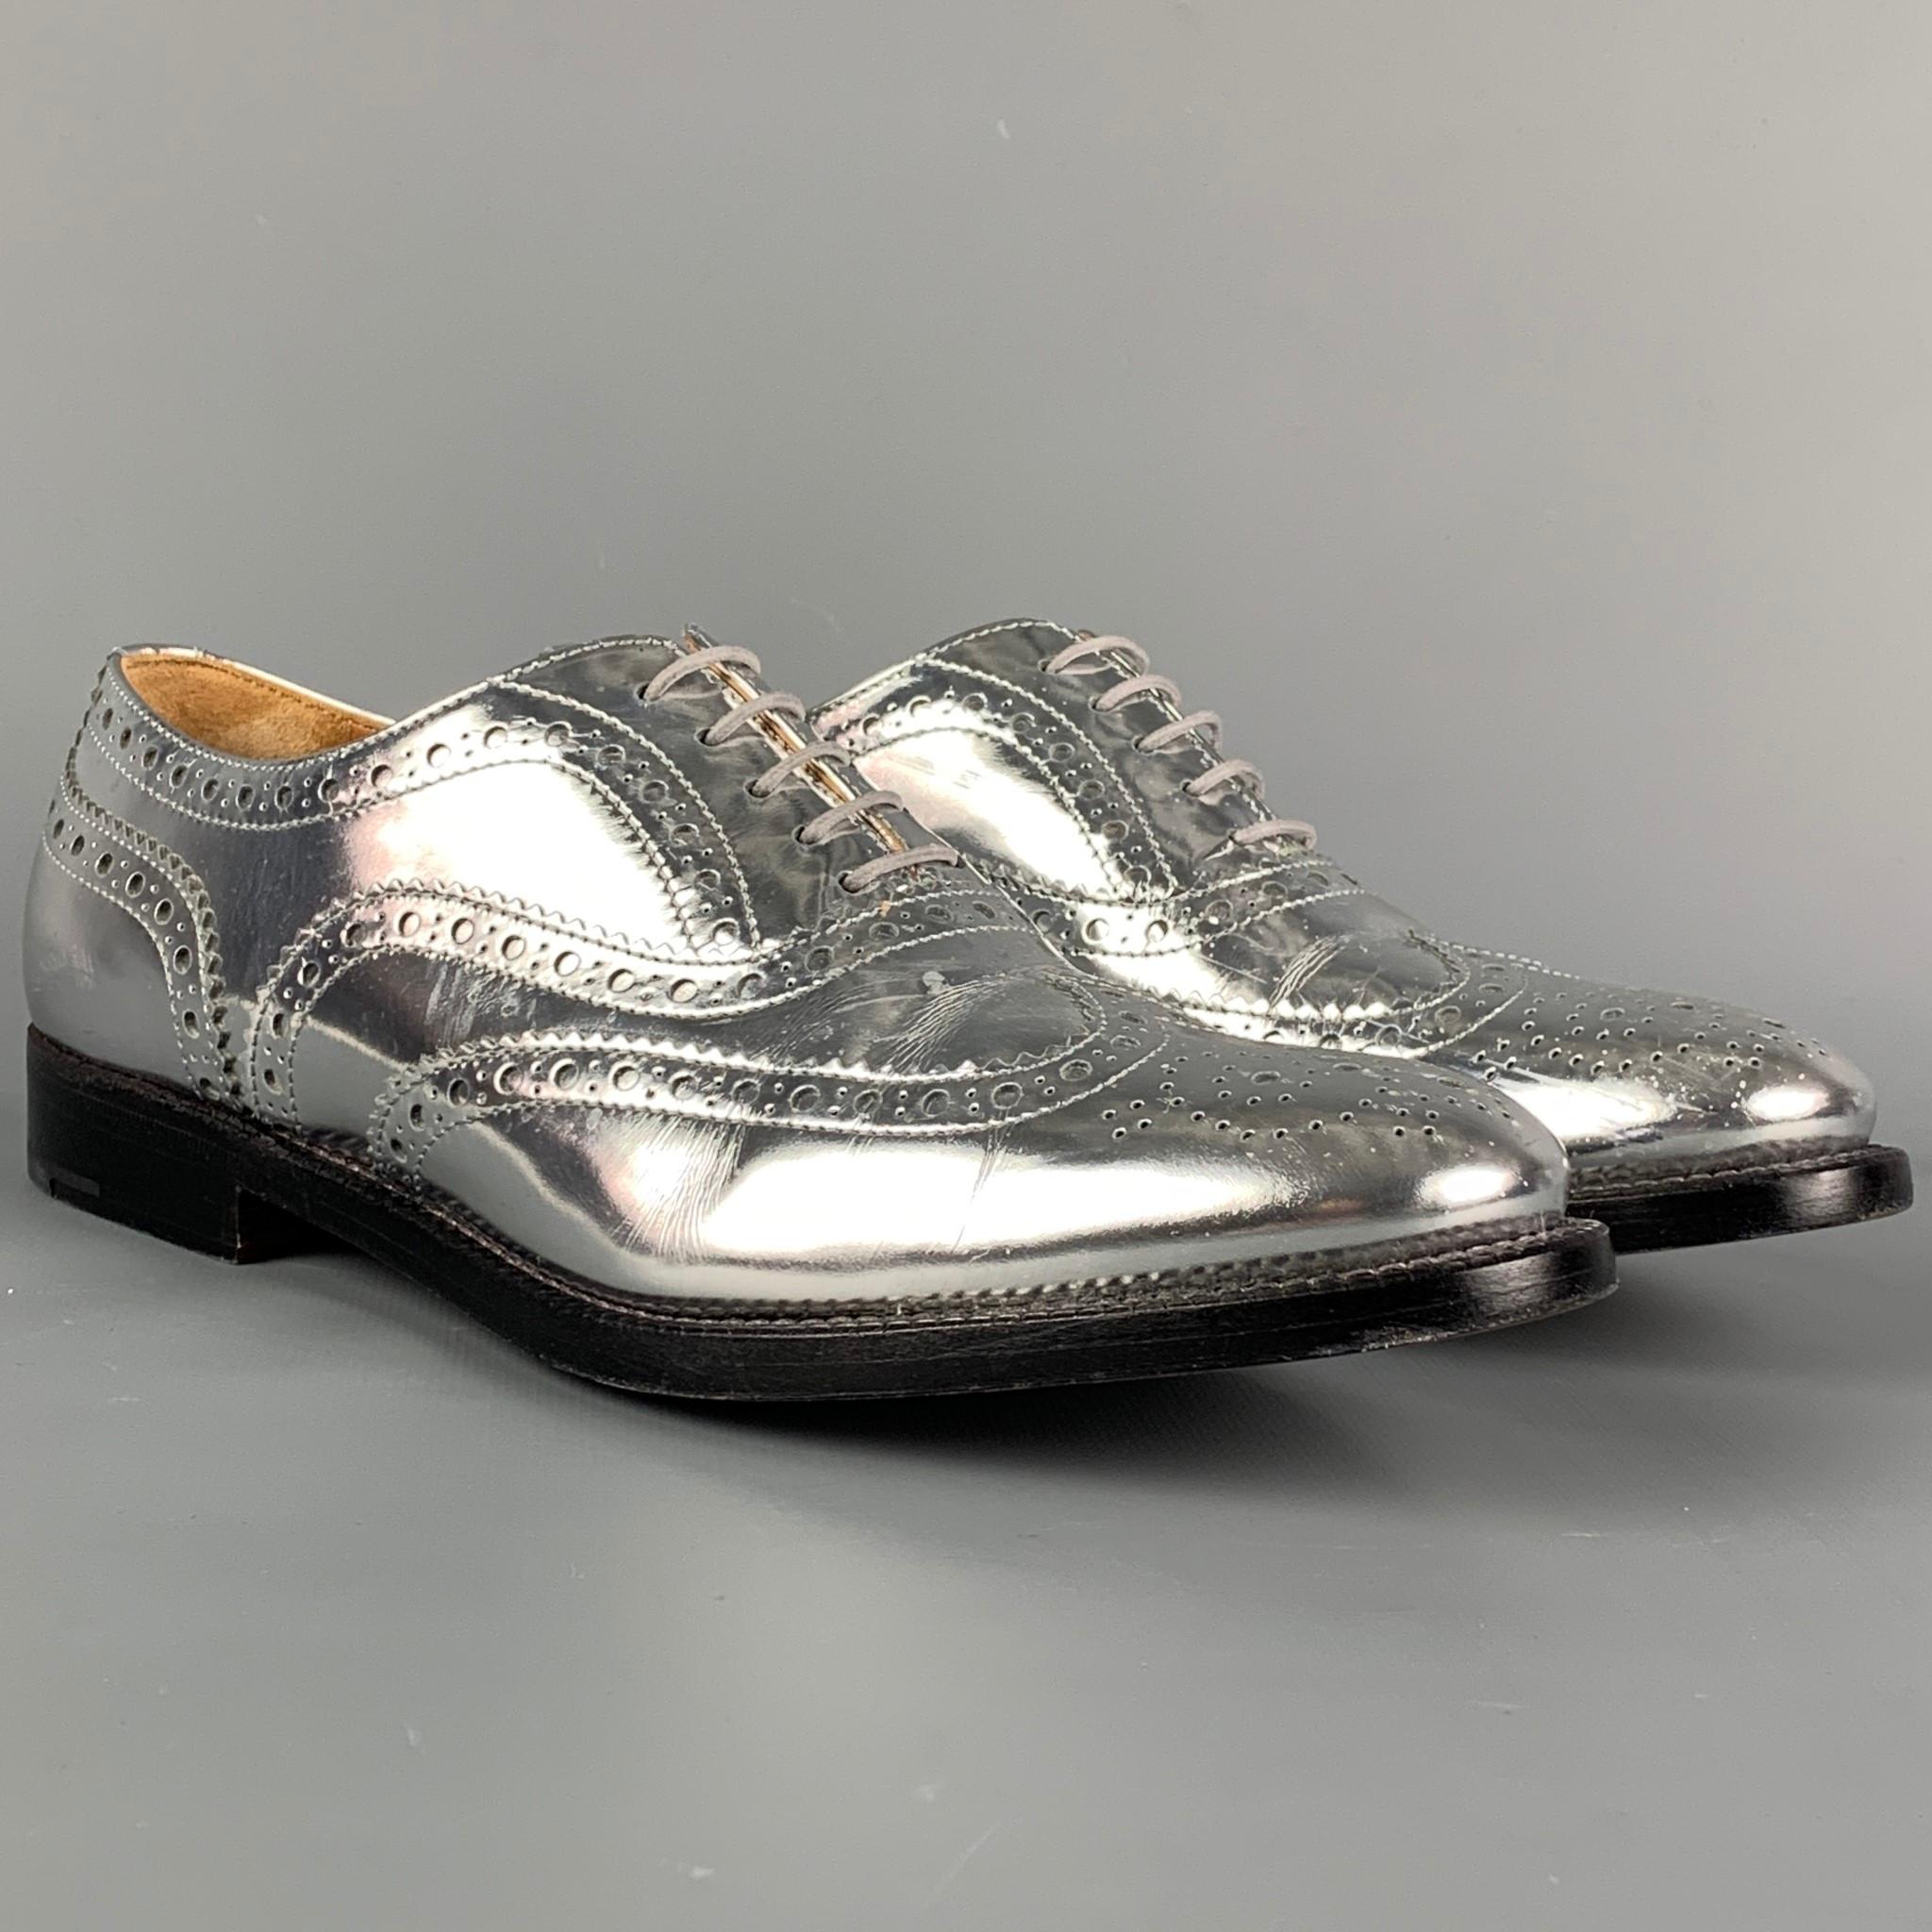 CHURCH'S shoes comes in a silver metallic perforated leather featuring a wingtip style and a lace up closure. Made in Italy. 

Very Good Pre-Owned Condition.
Marked: 37.5
Original Retail Price: $725.00

Outsole: 11 in. x 3.5 in. 